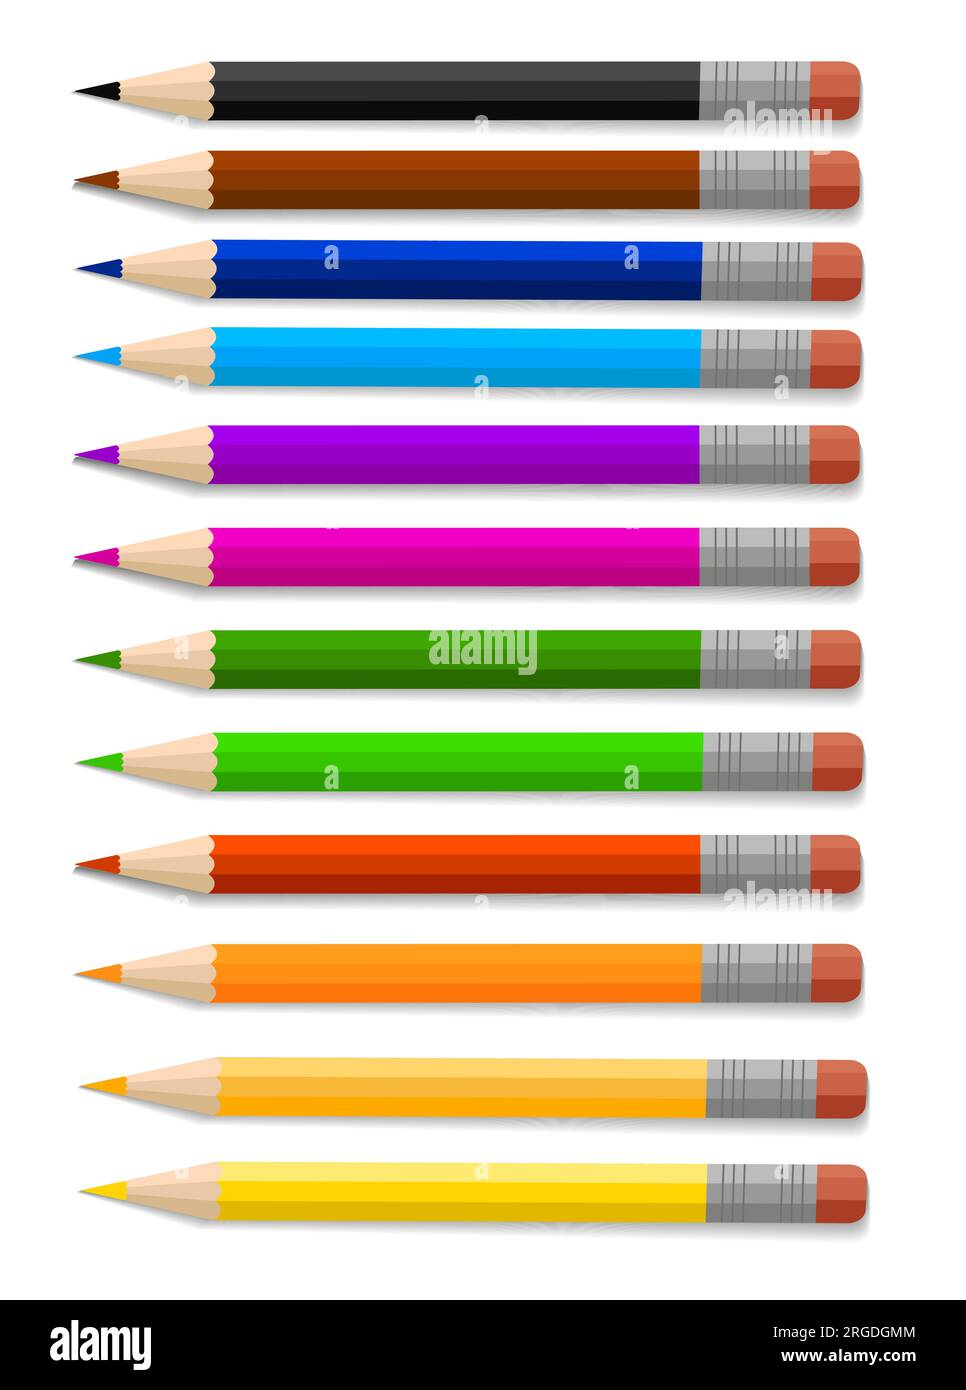 https://c8.alamy.com/comp/2RGDGMM/a-set-of-colored-pencils-12-colors-school-goods-school-supplies-stationery-on-a-white-background-in-eps10-format-back-to-school-2RGDGMM.jpg